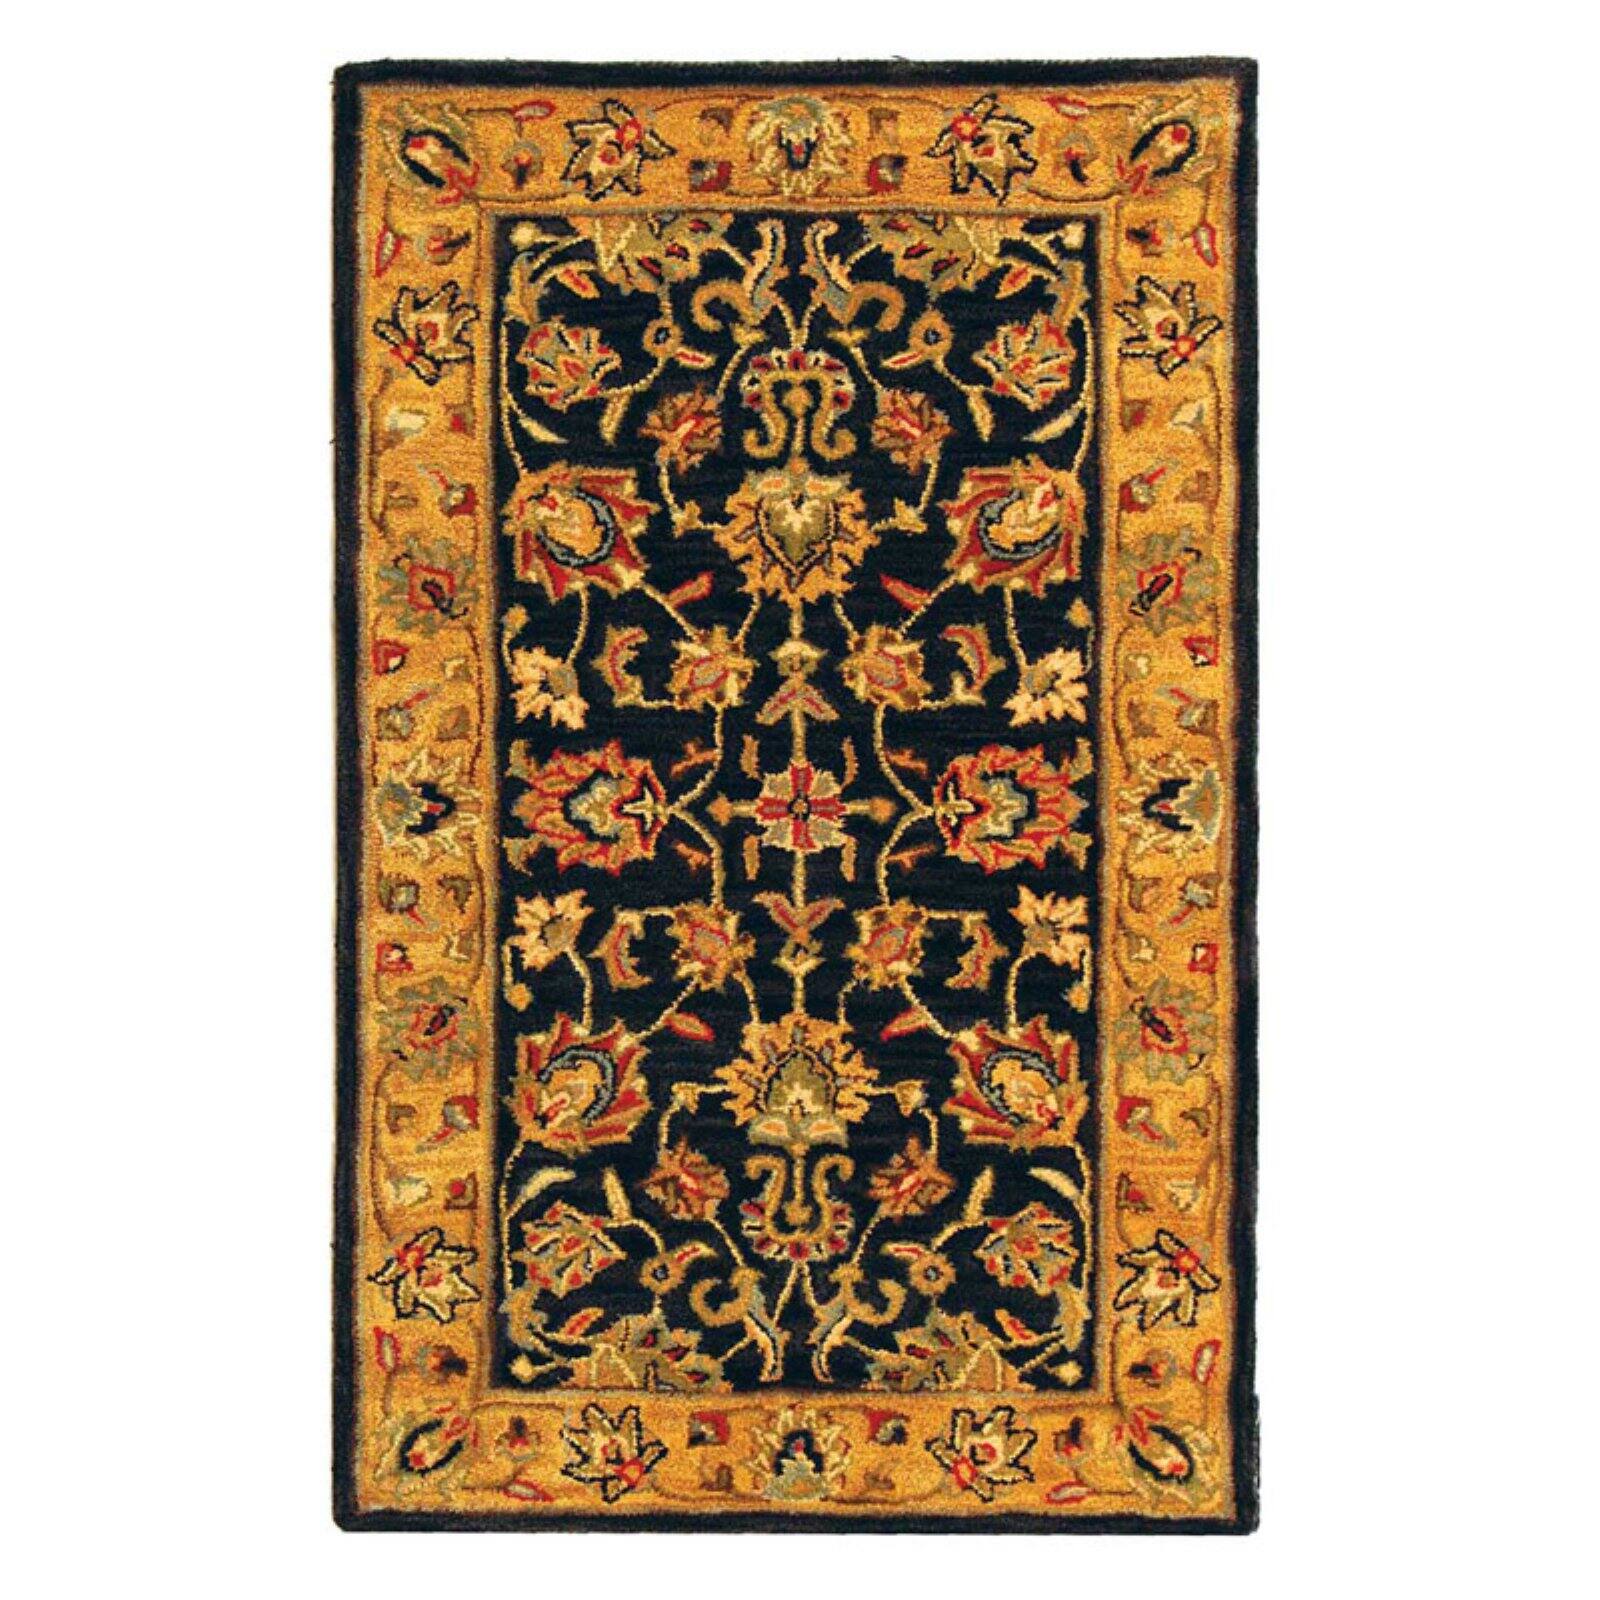 SAFAVIEH Heritage Regis Traditional Wool Area Rug, Charcoal/Gold, 3'6" x 3'6" Round - image 5 of 10